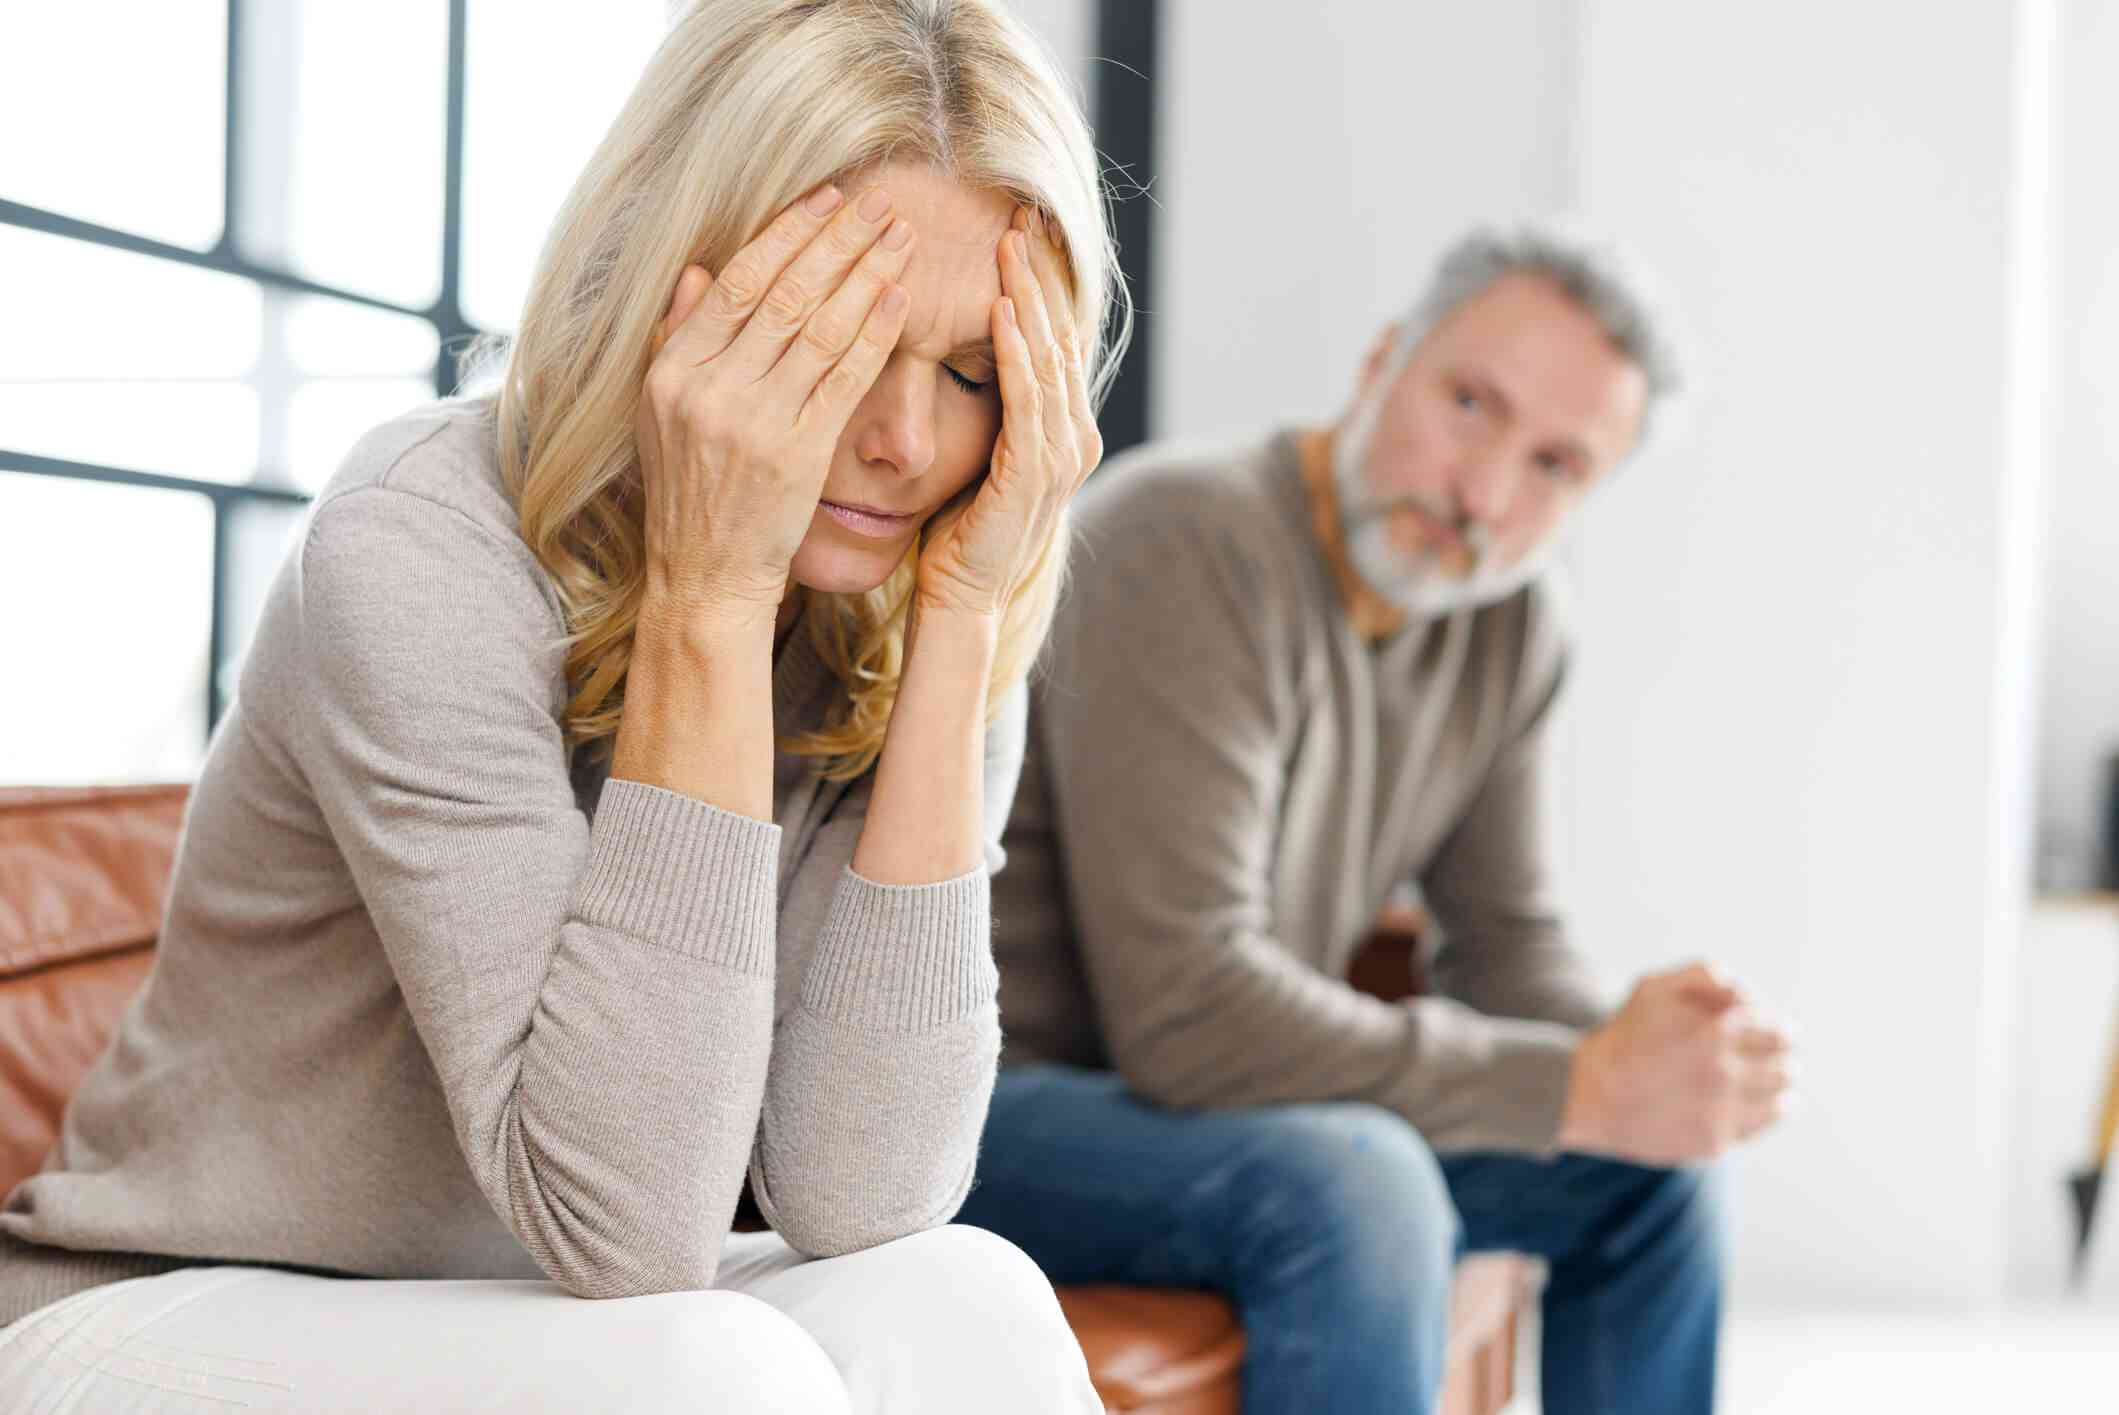 Husband With Anger Issues? Learn How Being Angry Can Ruin Your Marriage BetterHelp pic